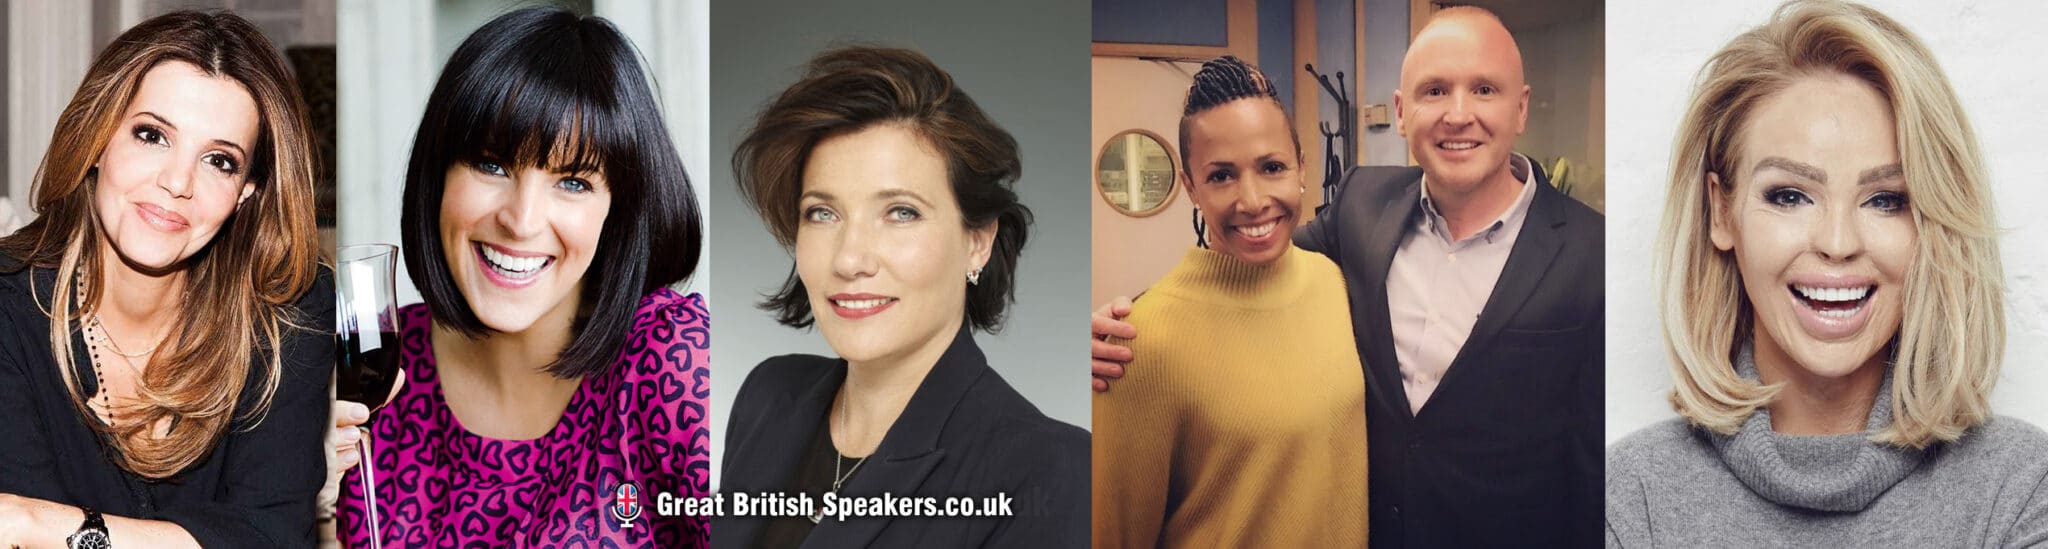 Top 15 Great British Speakers for World Mental Health Day 10th October